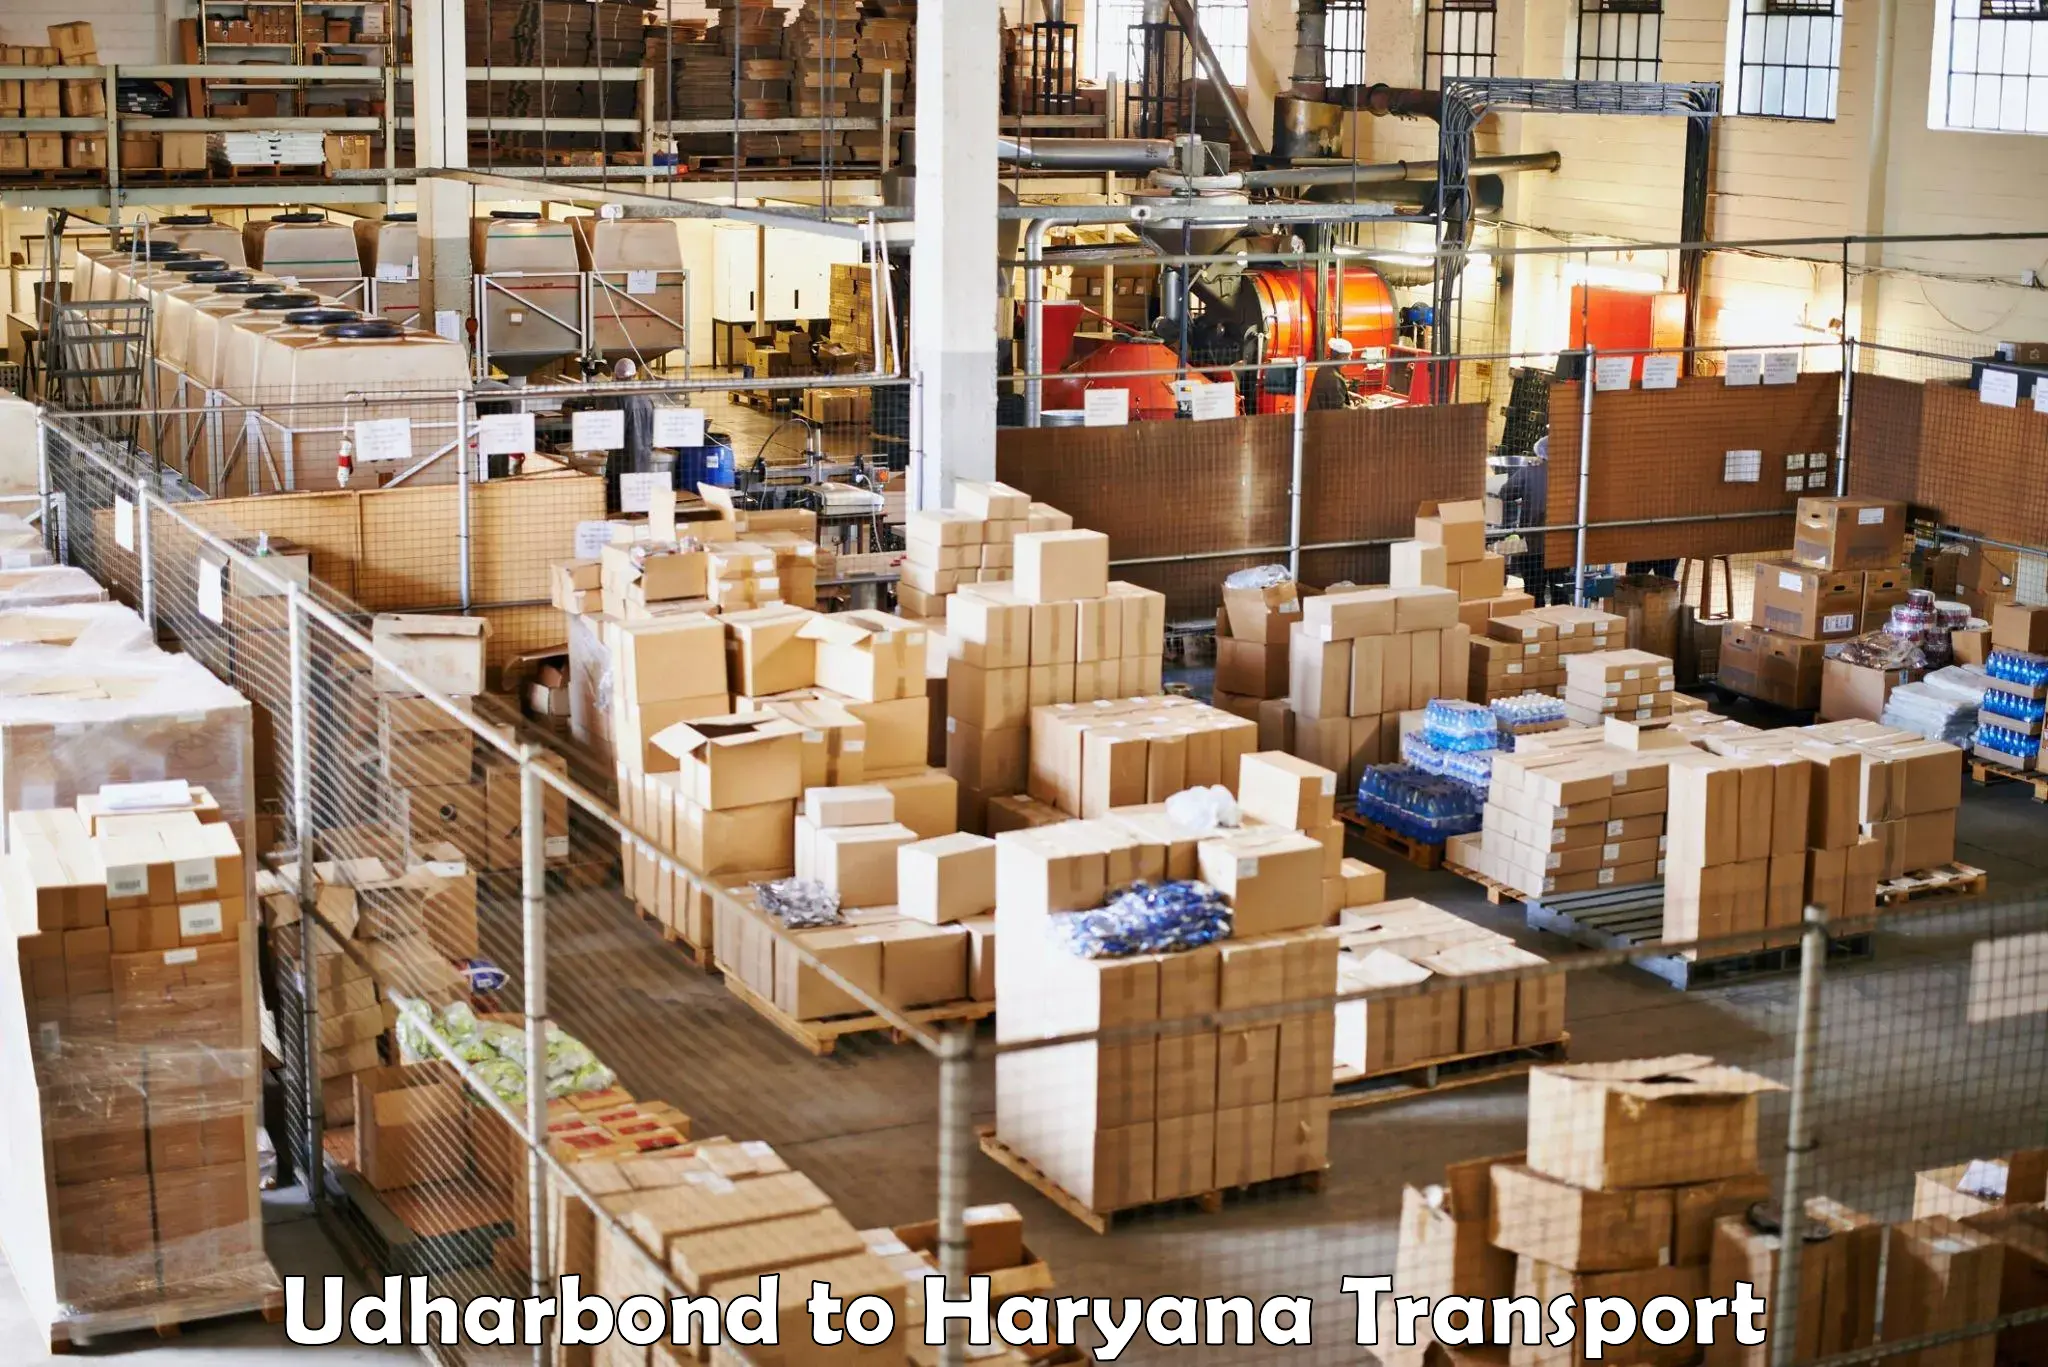 Daily parcel service transport Udharbond to Haryana